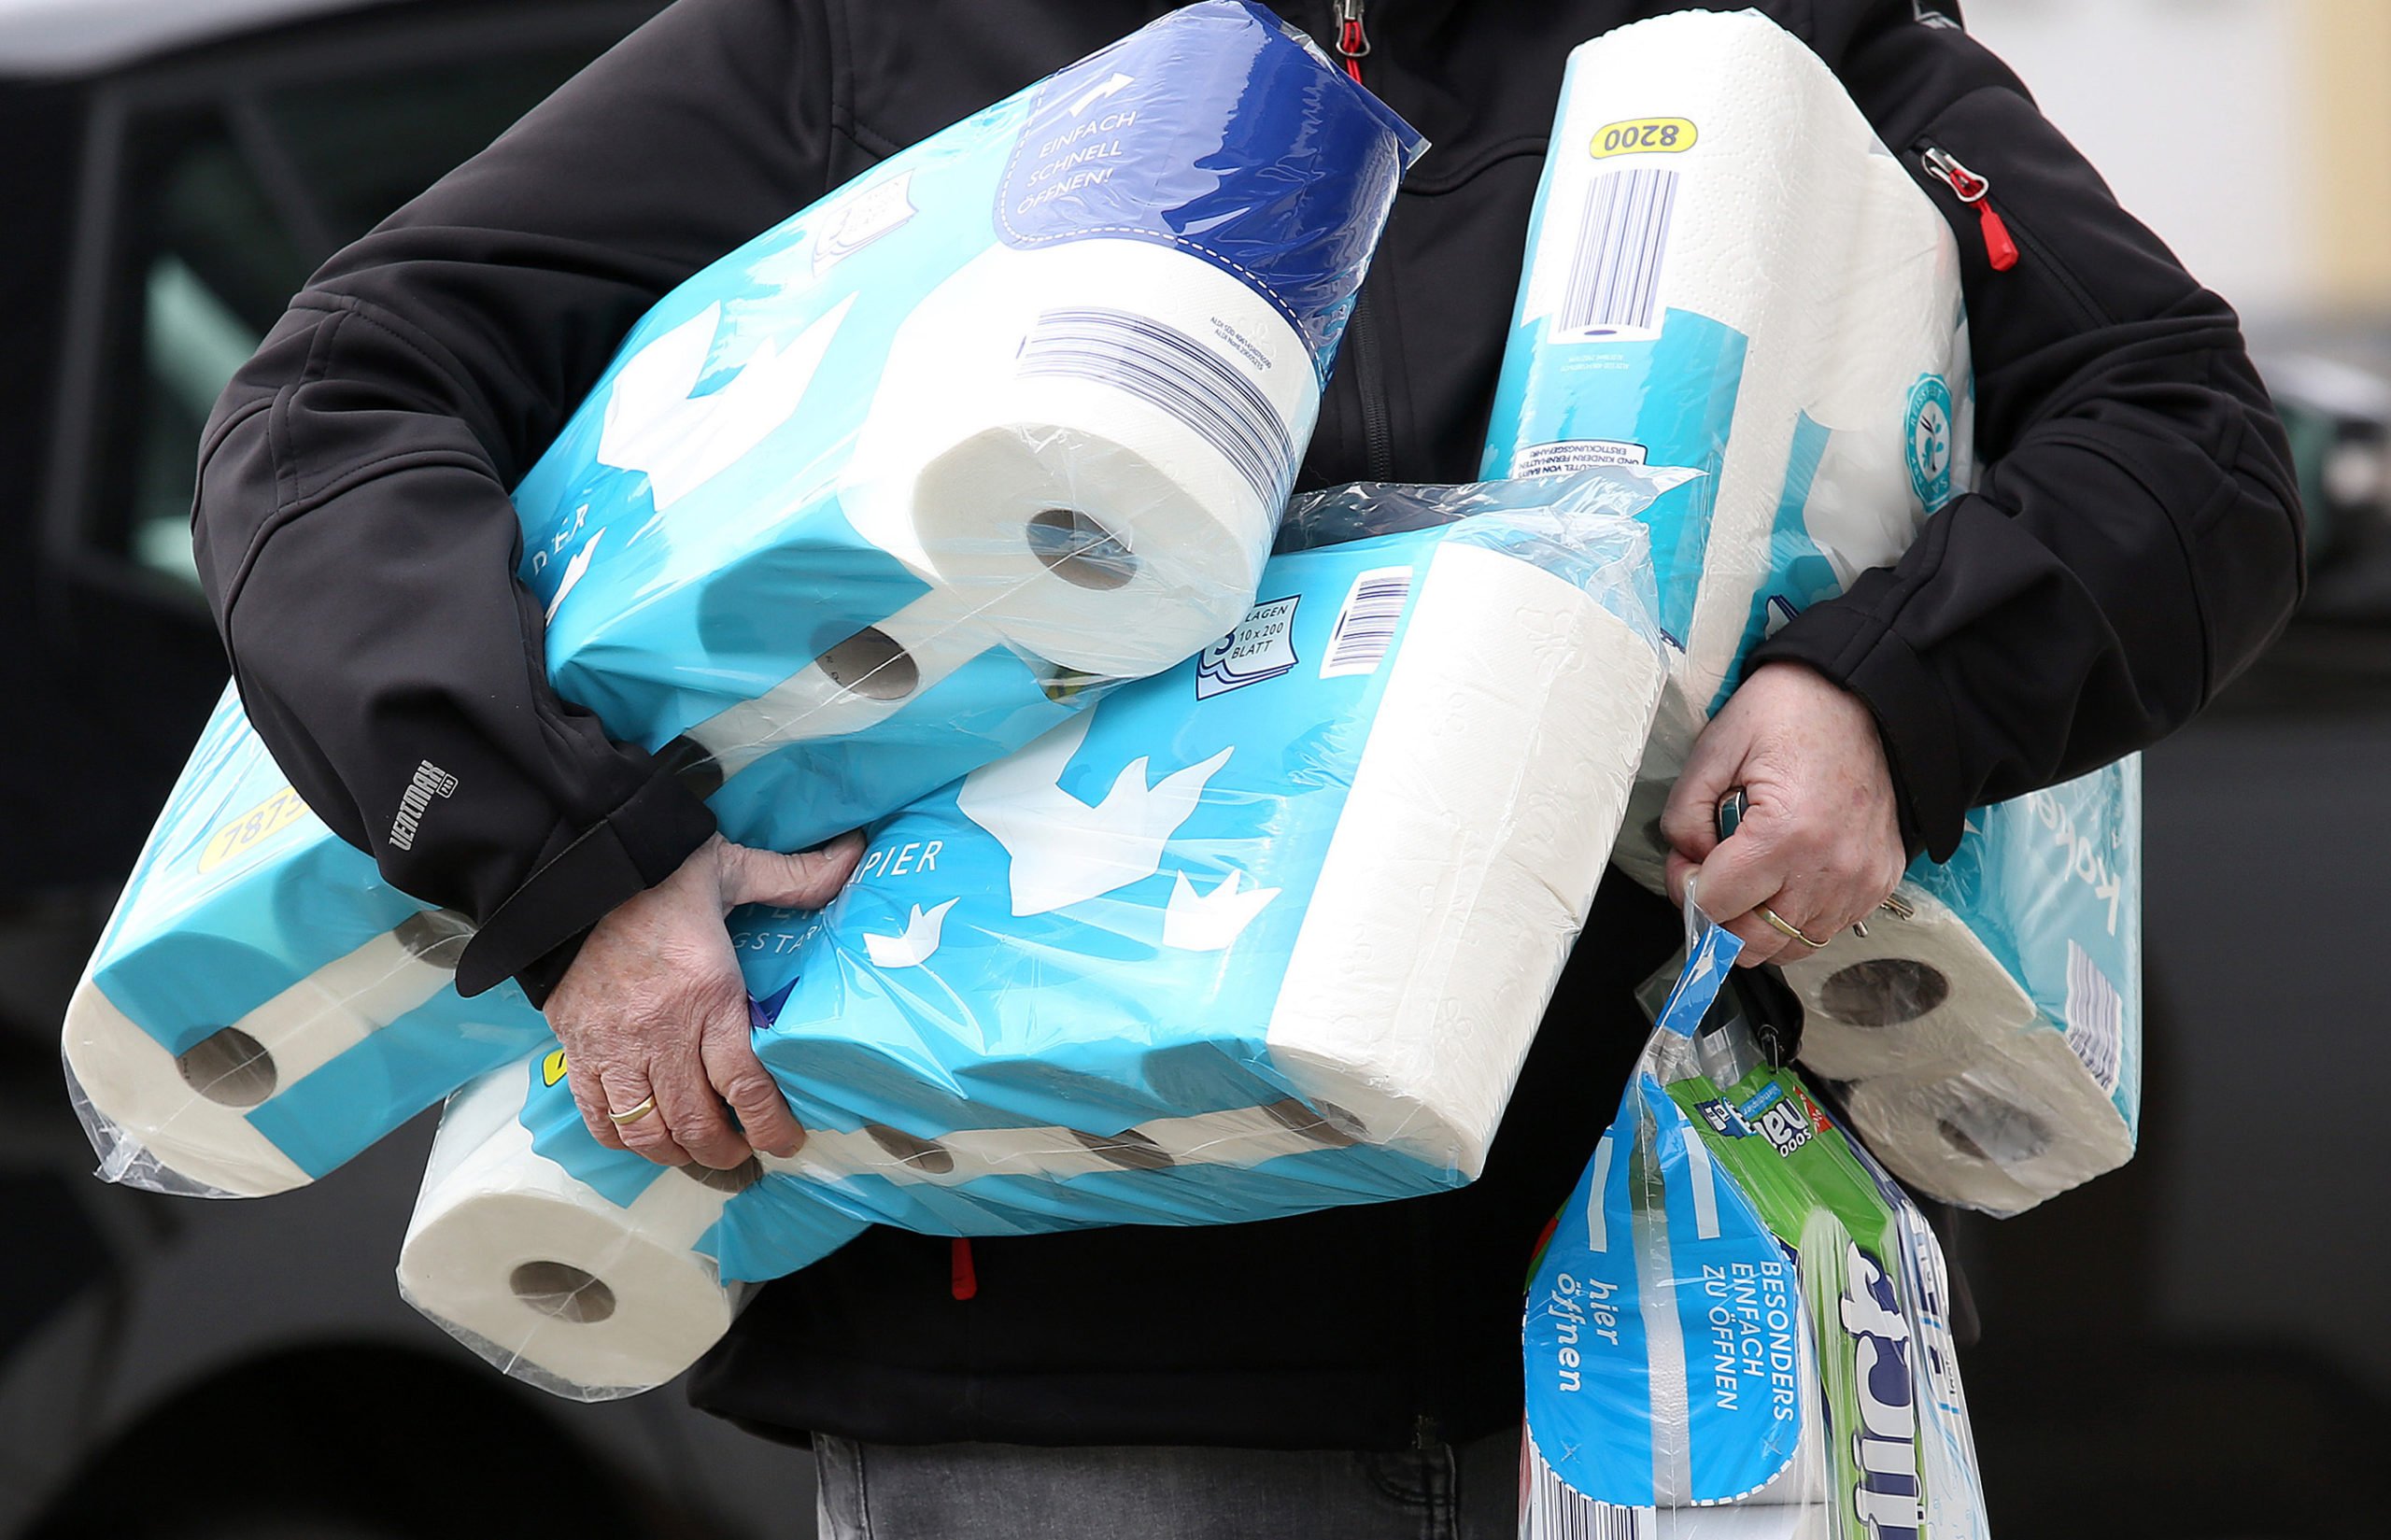 A shopper holds toilet roll and kitchen paper at the start of the pandemic in March 2020 when Germans were urged not to panic buy.